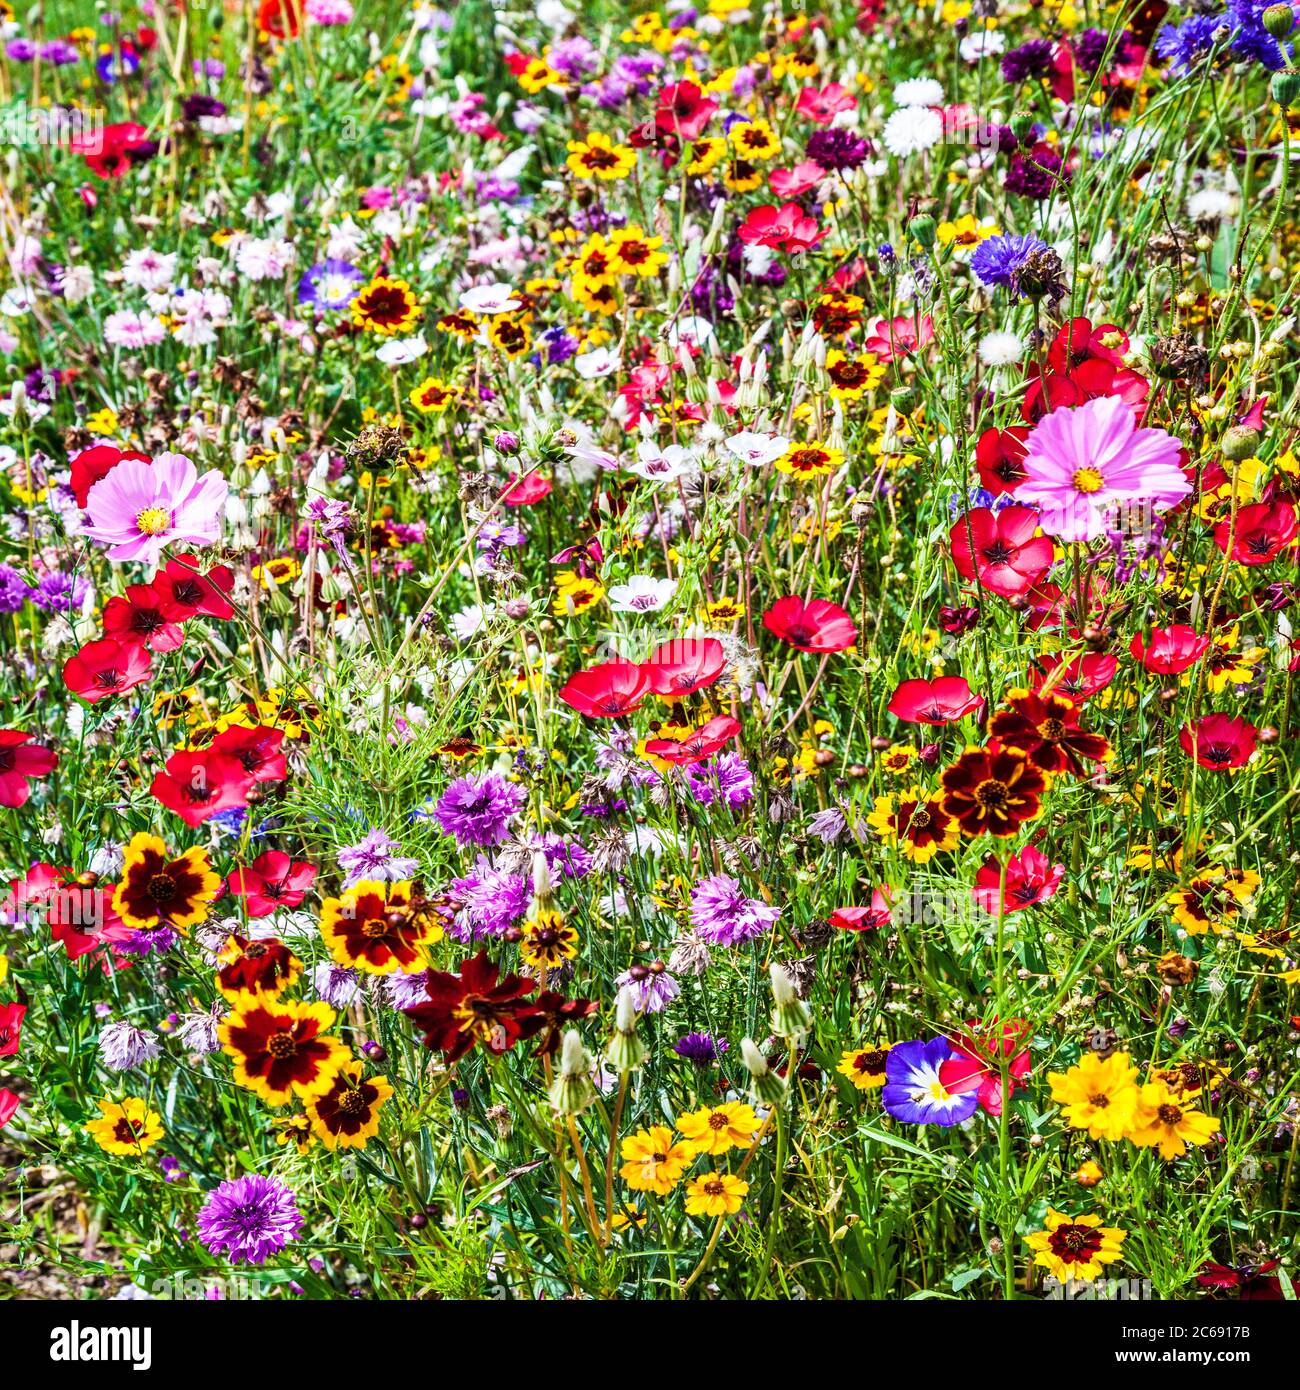 A wildflower meadow area in an English country garden. Stock Photo